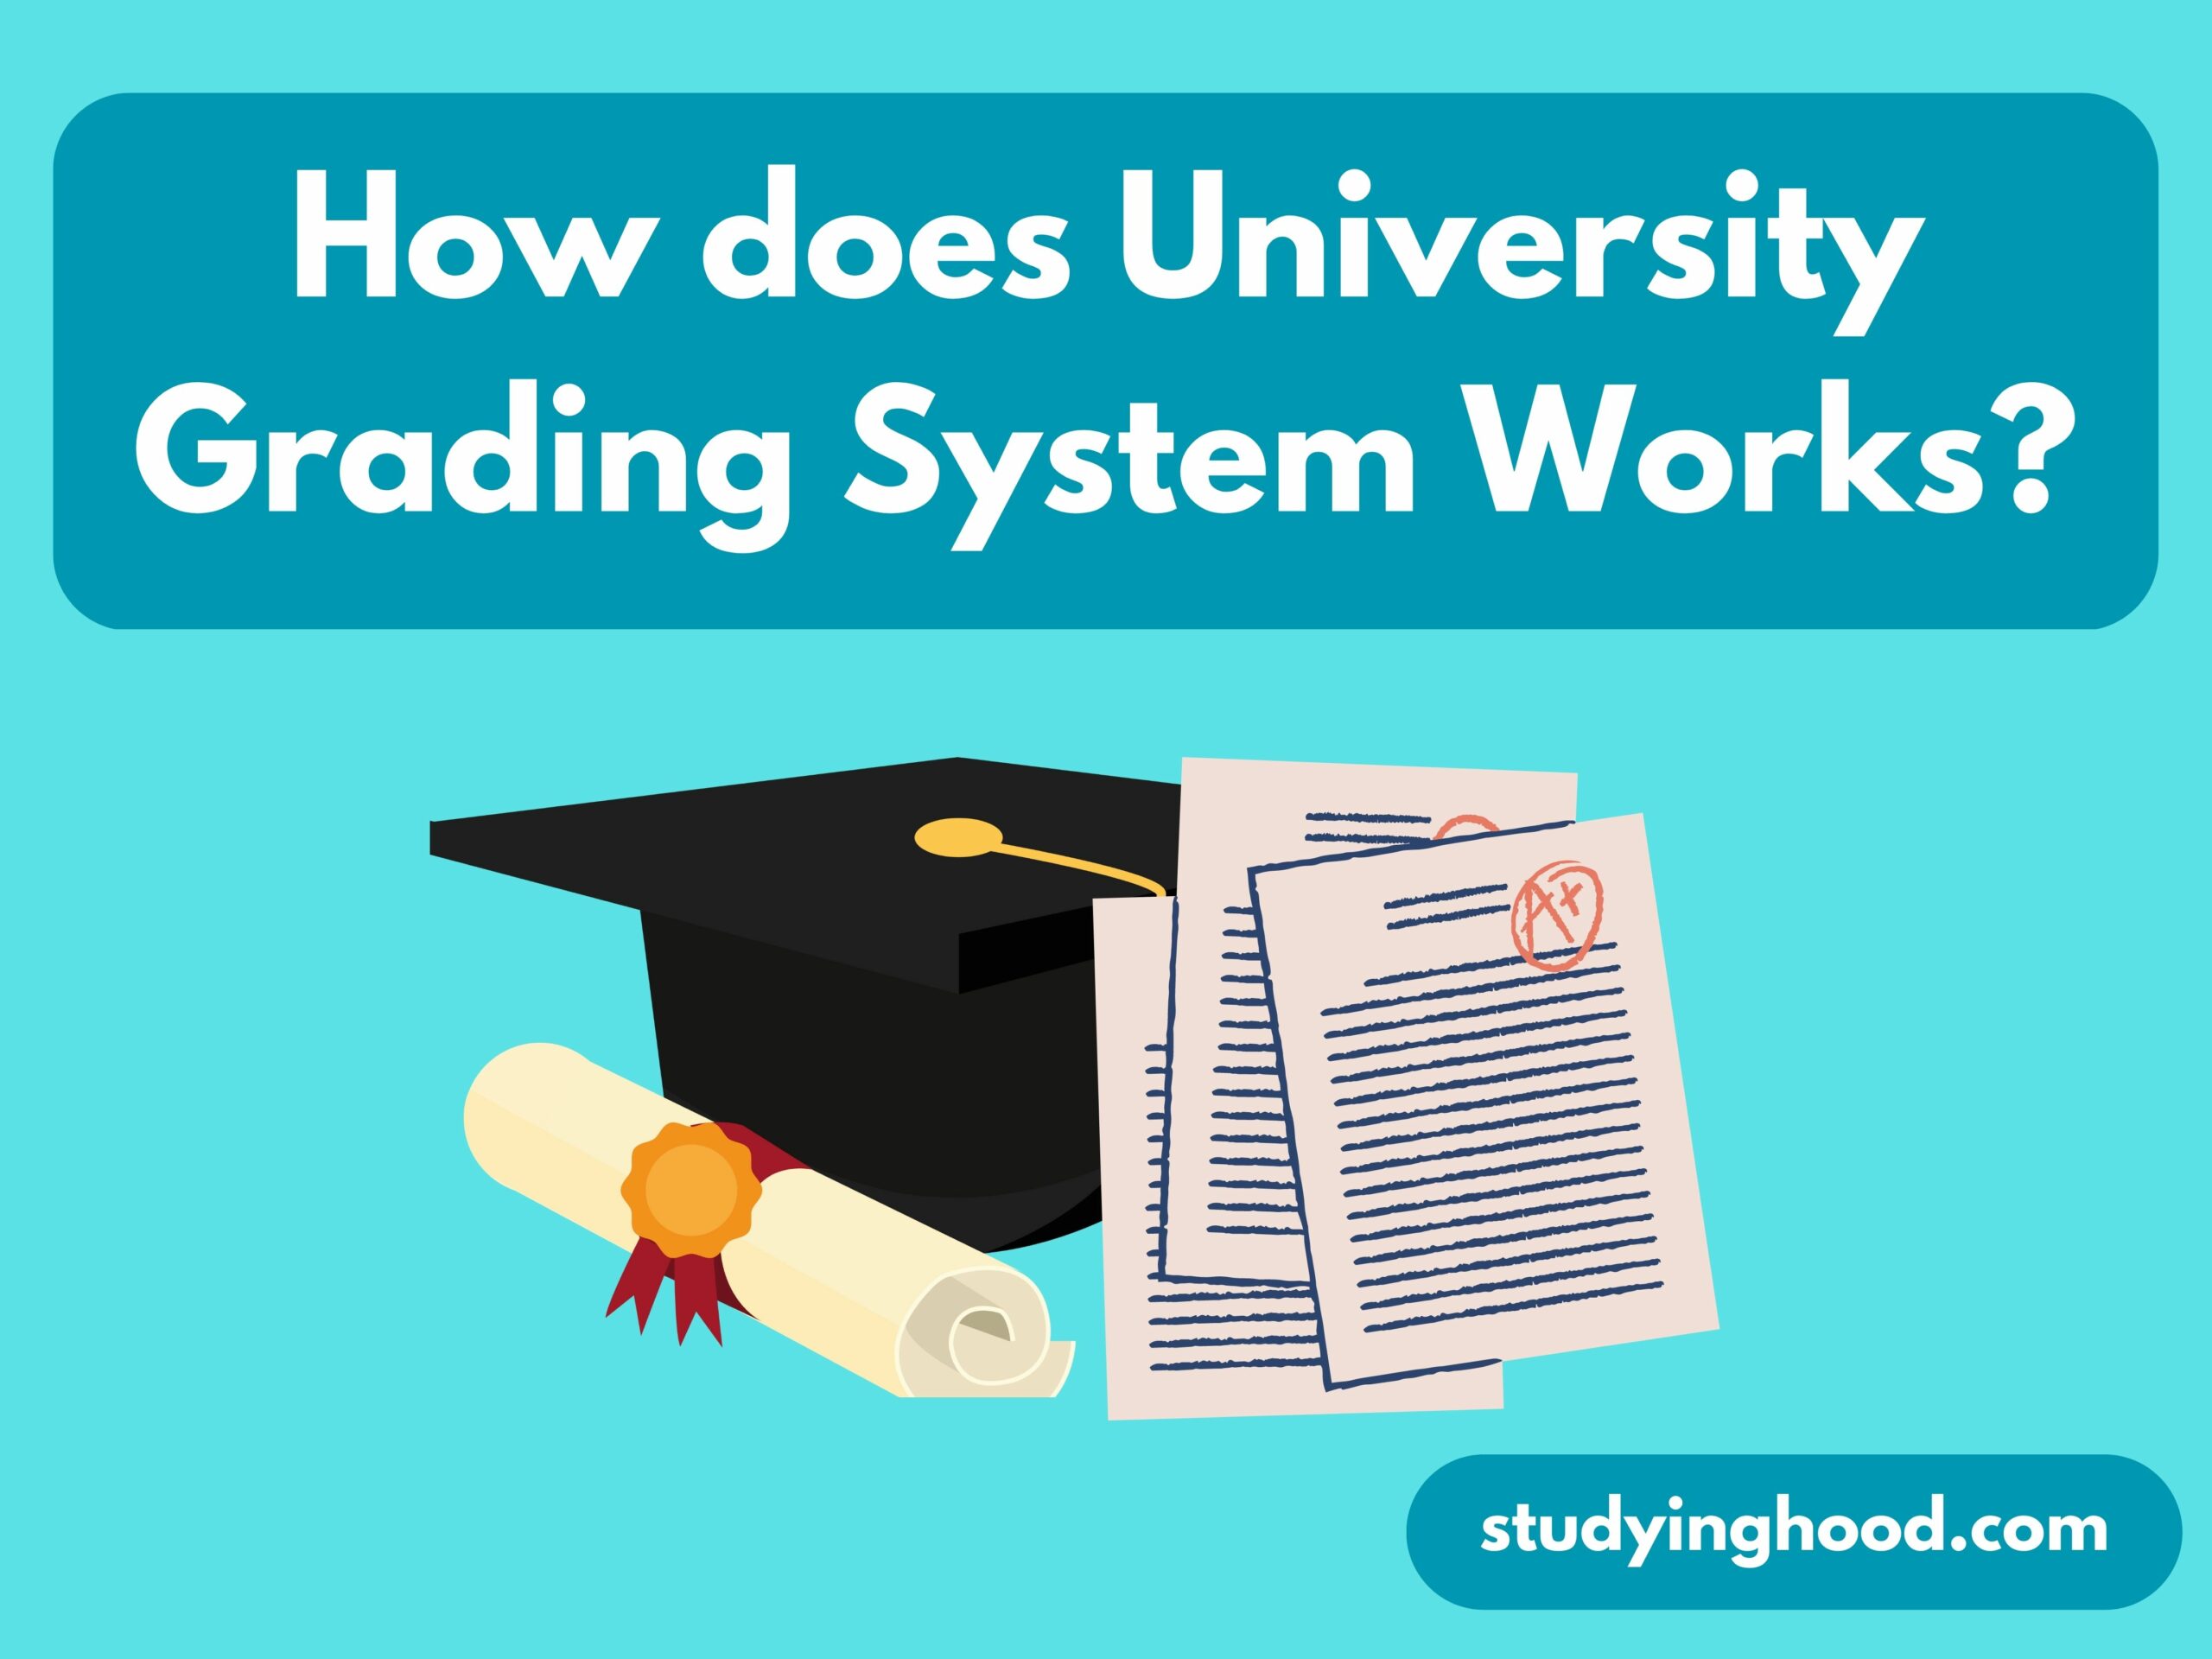 How does University Grading System Works?